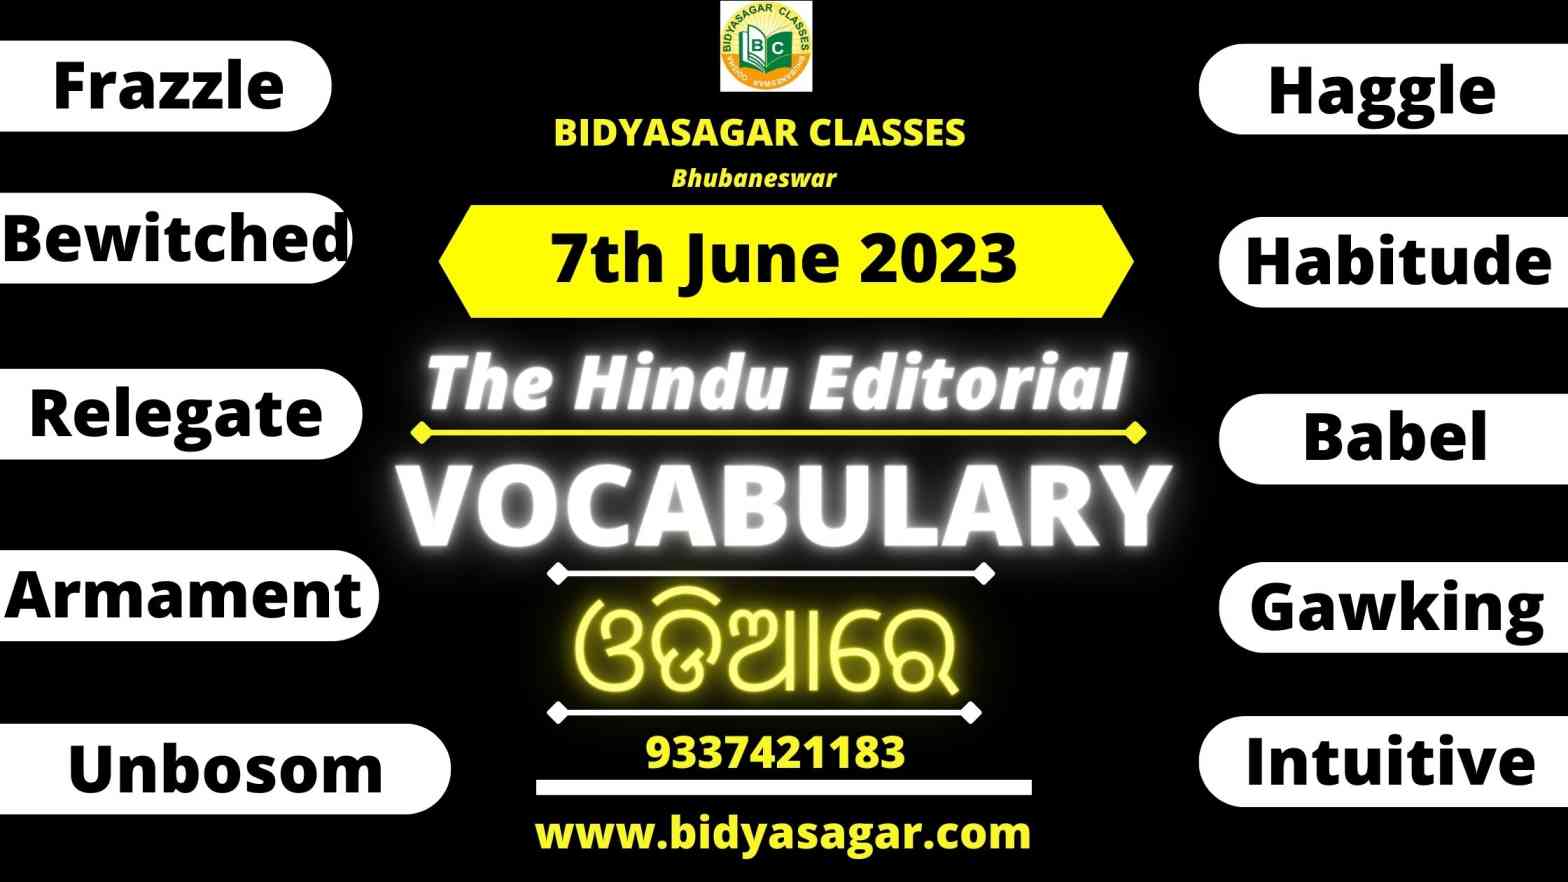 The Hindu Editorial Vocabulary of 7th June 2023